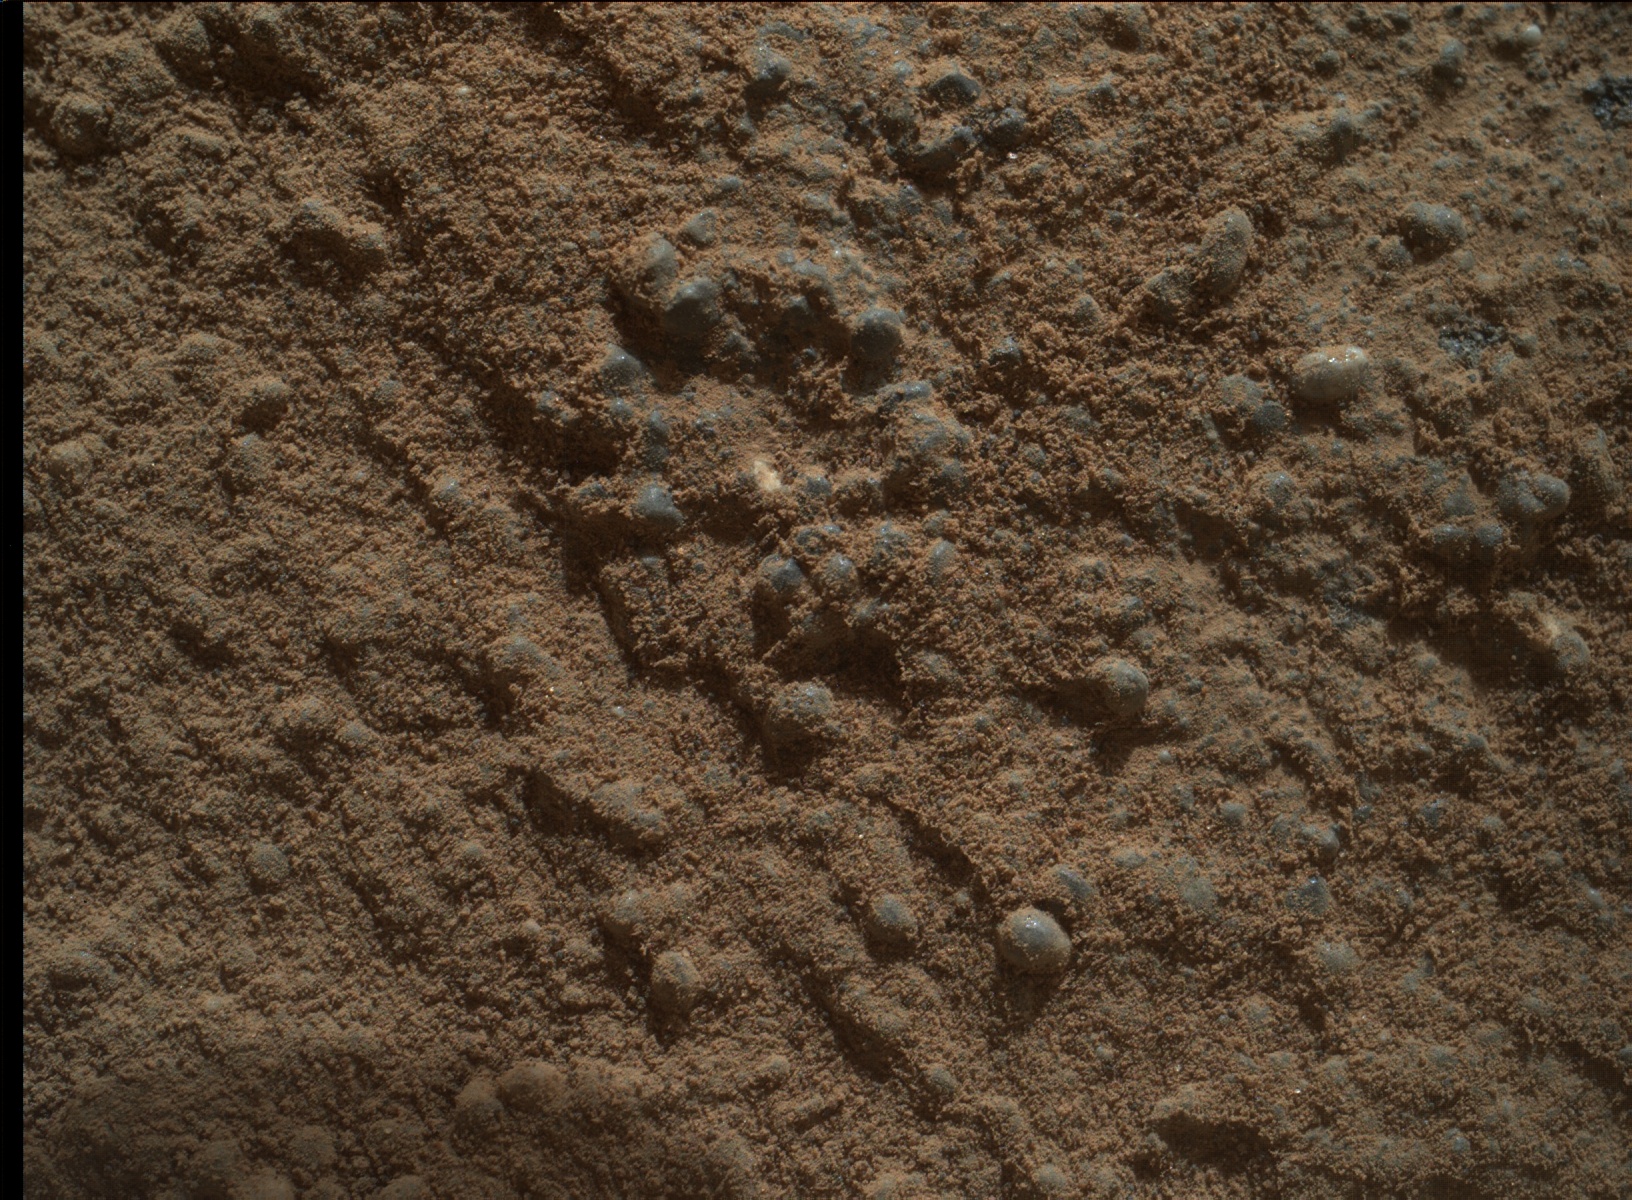 Nasa's Mars rover Curiosity acquired this image using its Mars Hand Lens Imager (MAHLI) on Sol 1330